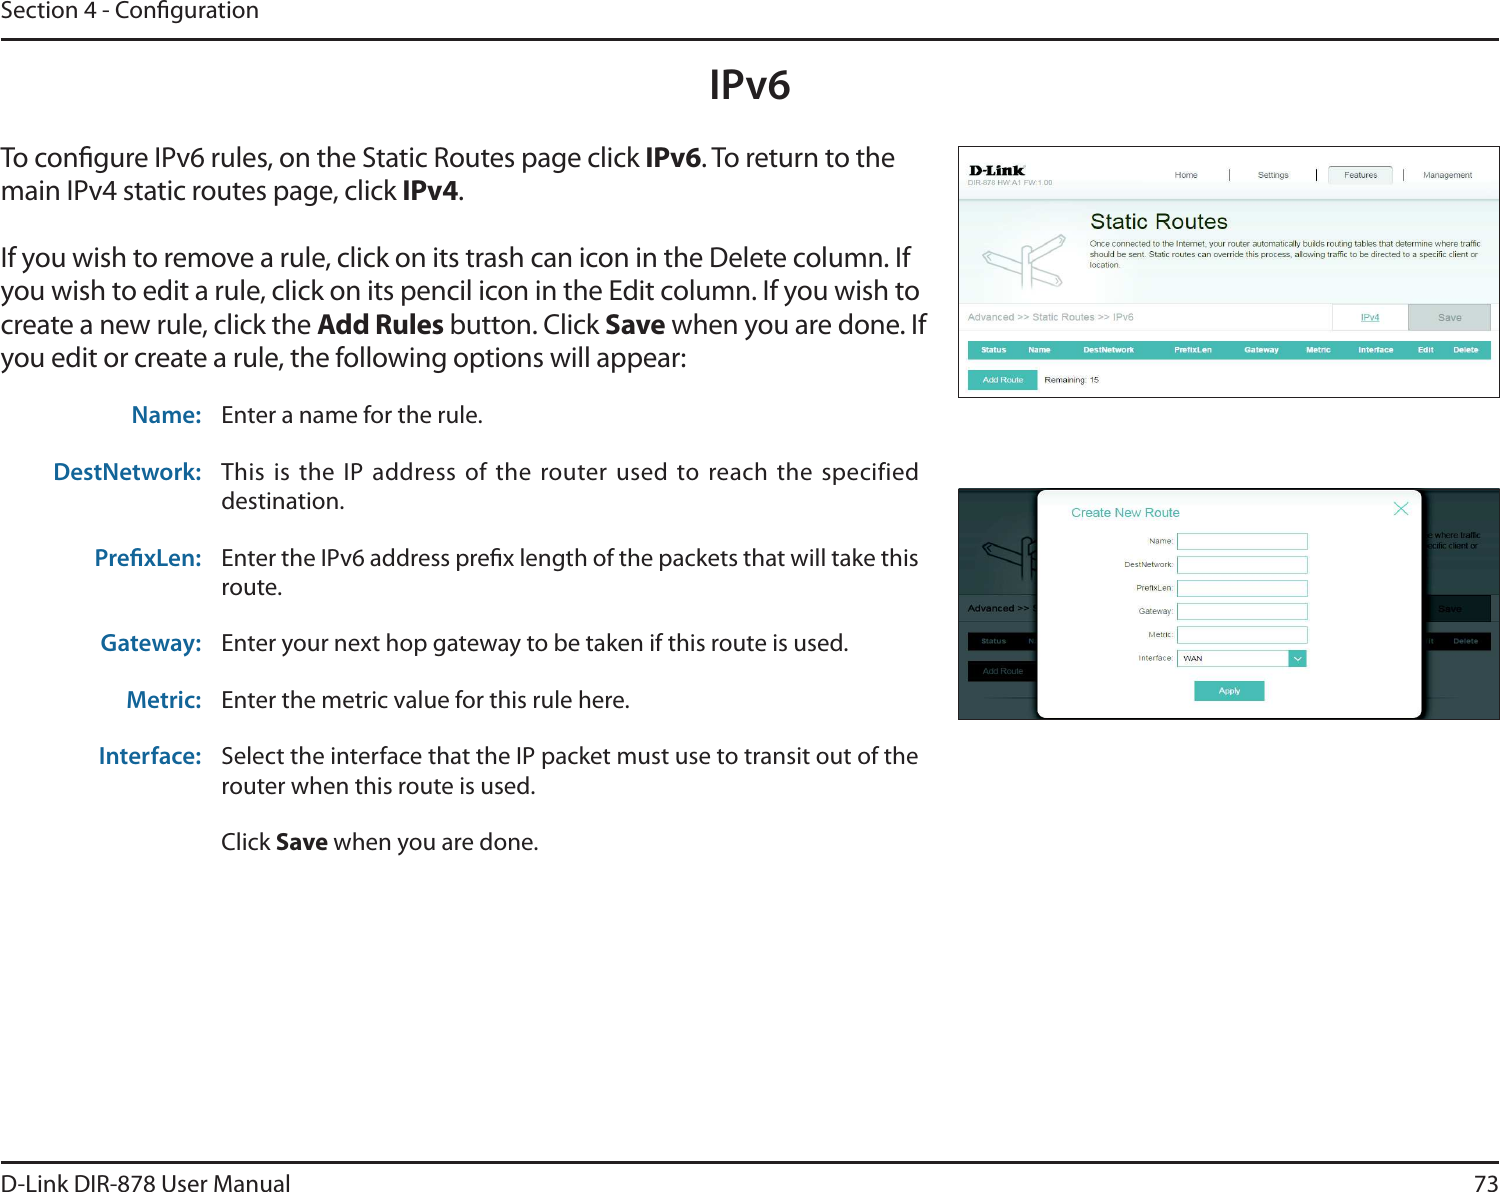 73D-Link DIR-878 User ManualSection 4 - CongurationIPv6To congure IPv6 rules, on the Static Routes page click IPv6. To return to the main IPv4 static routes page, click IPv4.If you wish to remove a rule, click on its trash can icon in the Delete column. If you wish to edit a rule, click on its pencil icon in the Edit column. If you wish to create a new rule, click the &quot;EE3VMFTbutton. Click Save when you are done. If you edit or create a rule, the following options will appear:Name: Enter a name for the rule.DestNetwork: This is  the  IP  address  of  the  router  used to  reach  the  specified destination.PrexLen: Enter the IPv6 address prex length of the packets that will take this route. Gateway: Enter your next hop gateway to be taken if this route is used.Metric: Enter the metric value for this rule here.Interface: Select the interface that the IP packet must use to transit out of the router when this route is used.Click Save when you are done.